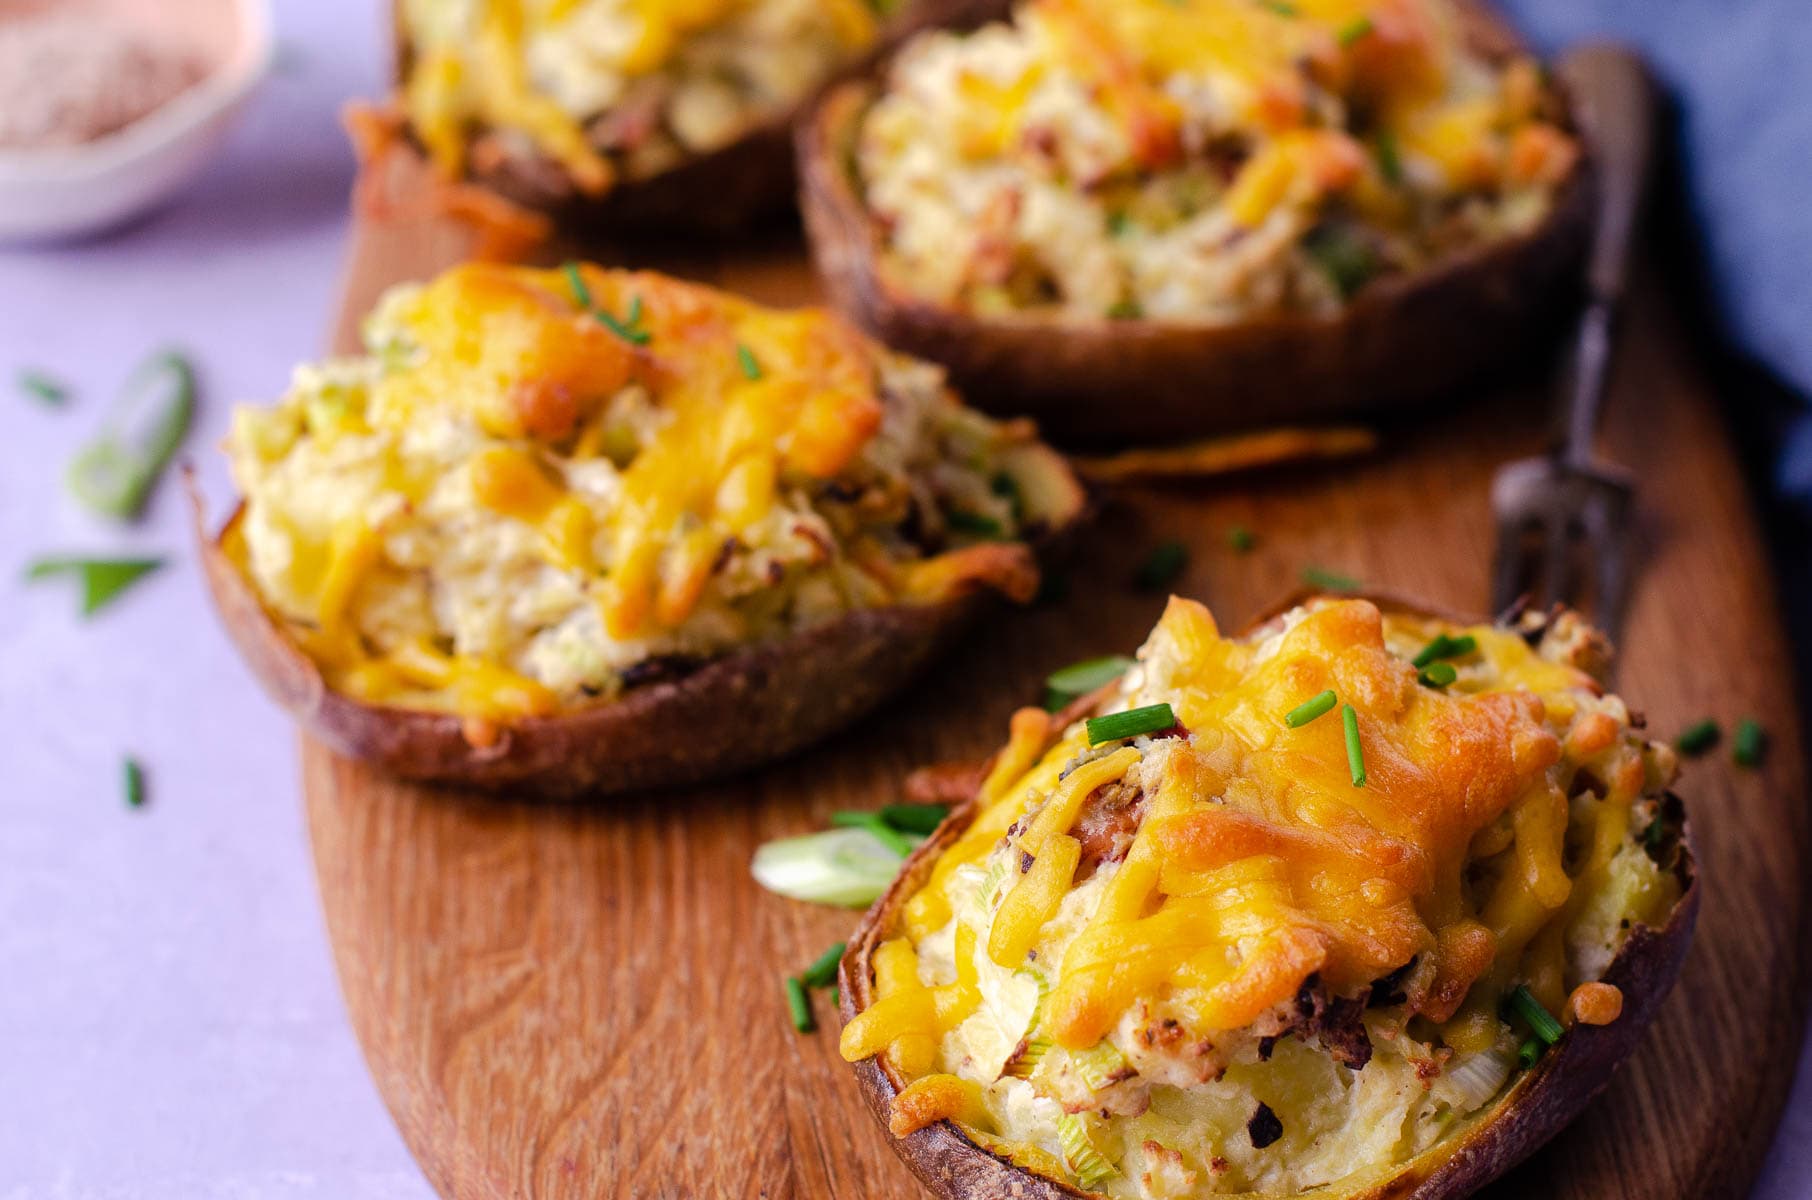 Twice baked potatoes loaded with cheese, onion and bacon served on a wooden chopping board and scattered with spring onions.